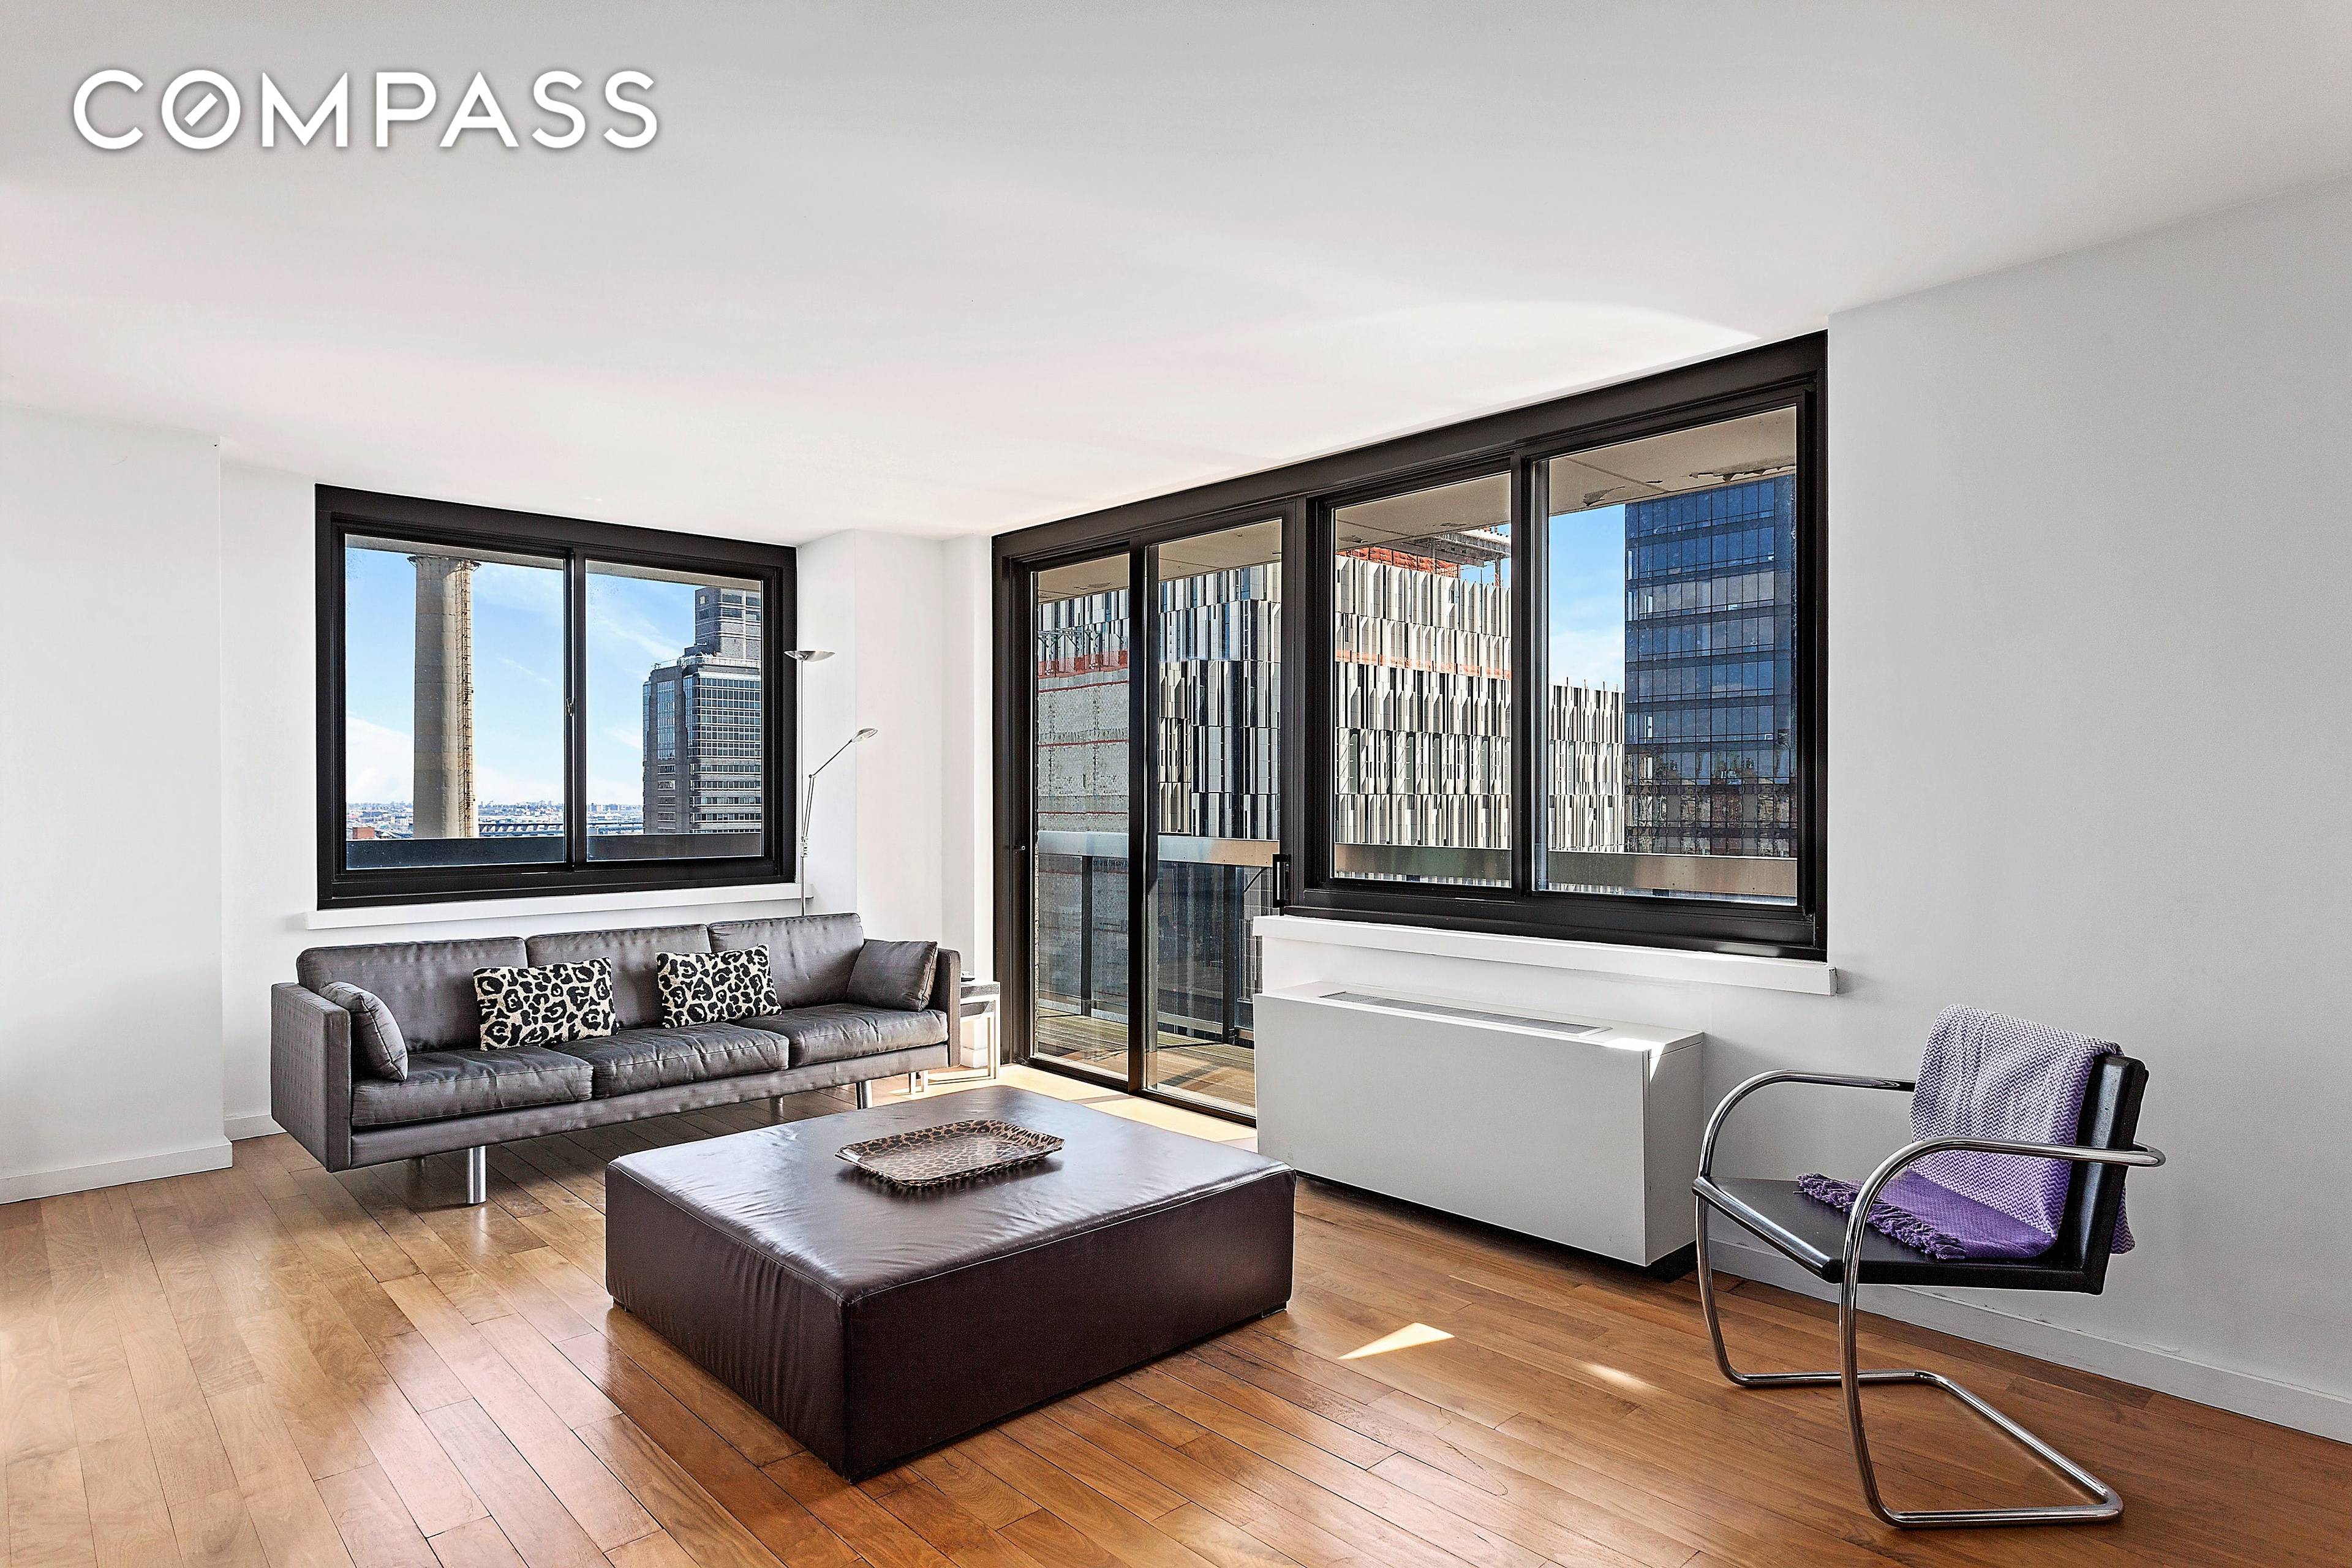 As 515 East 72nd Street owner residents and brokers, we are delighted to offer this large 2 bedroom 2 bath luxury home featuring northern and eastern exposures with a wrap ...